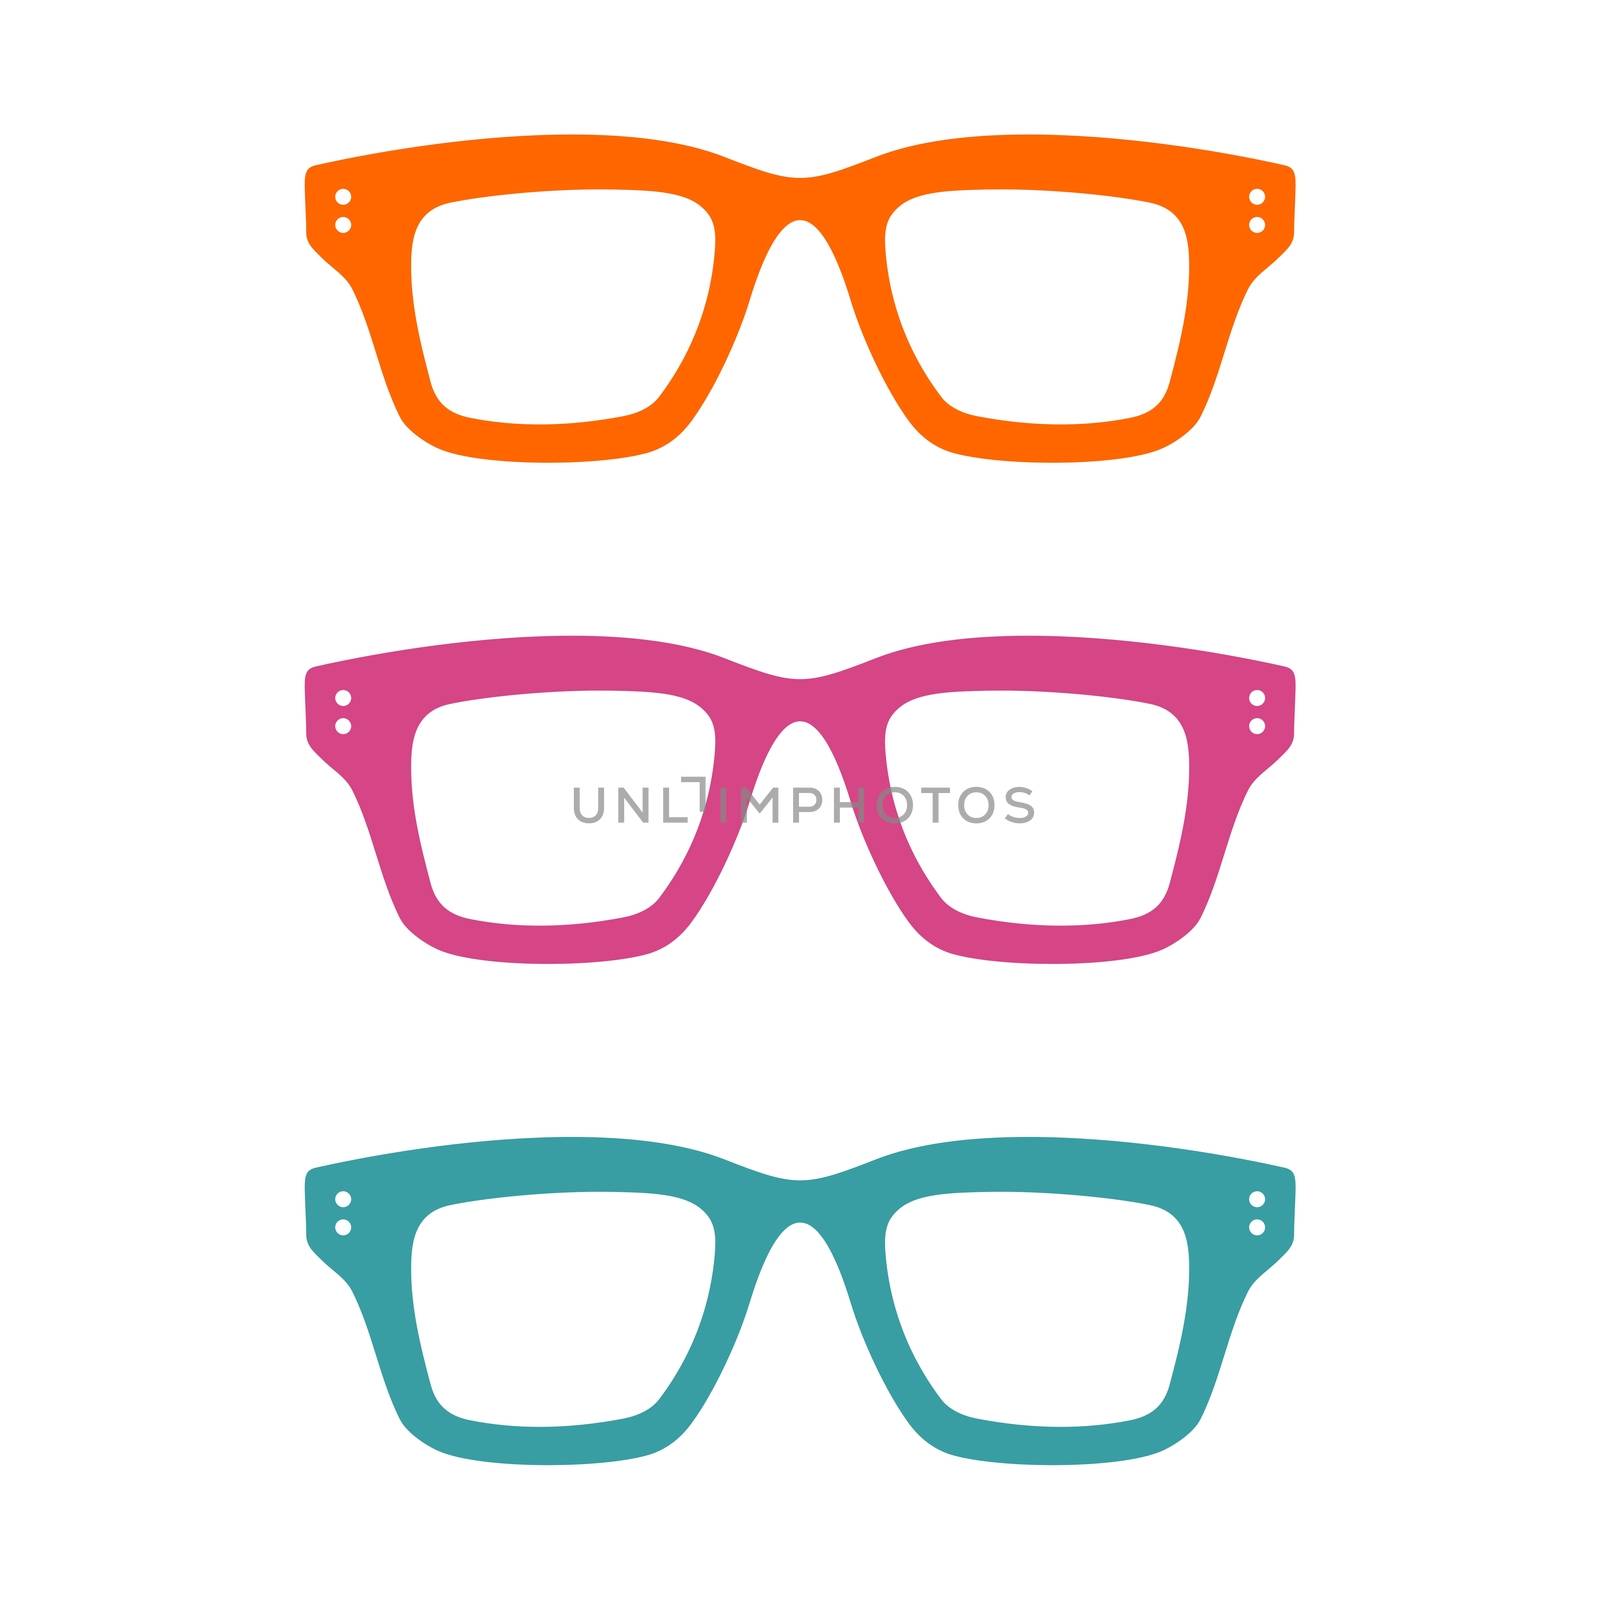 Colorful Geek Glasses Logo Template Illustration Design. Vector EPS 10. by soponyono1